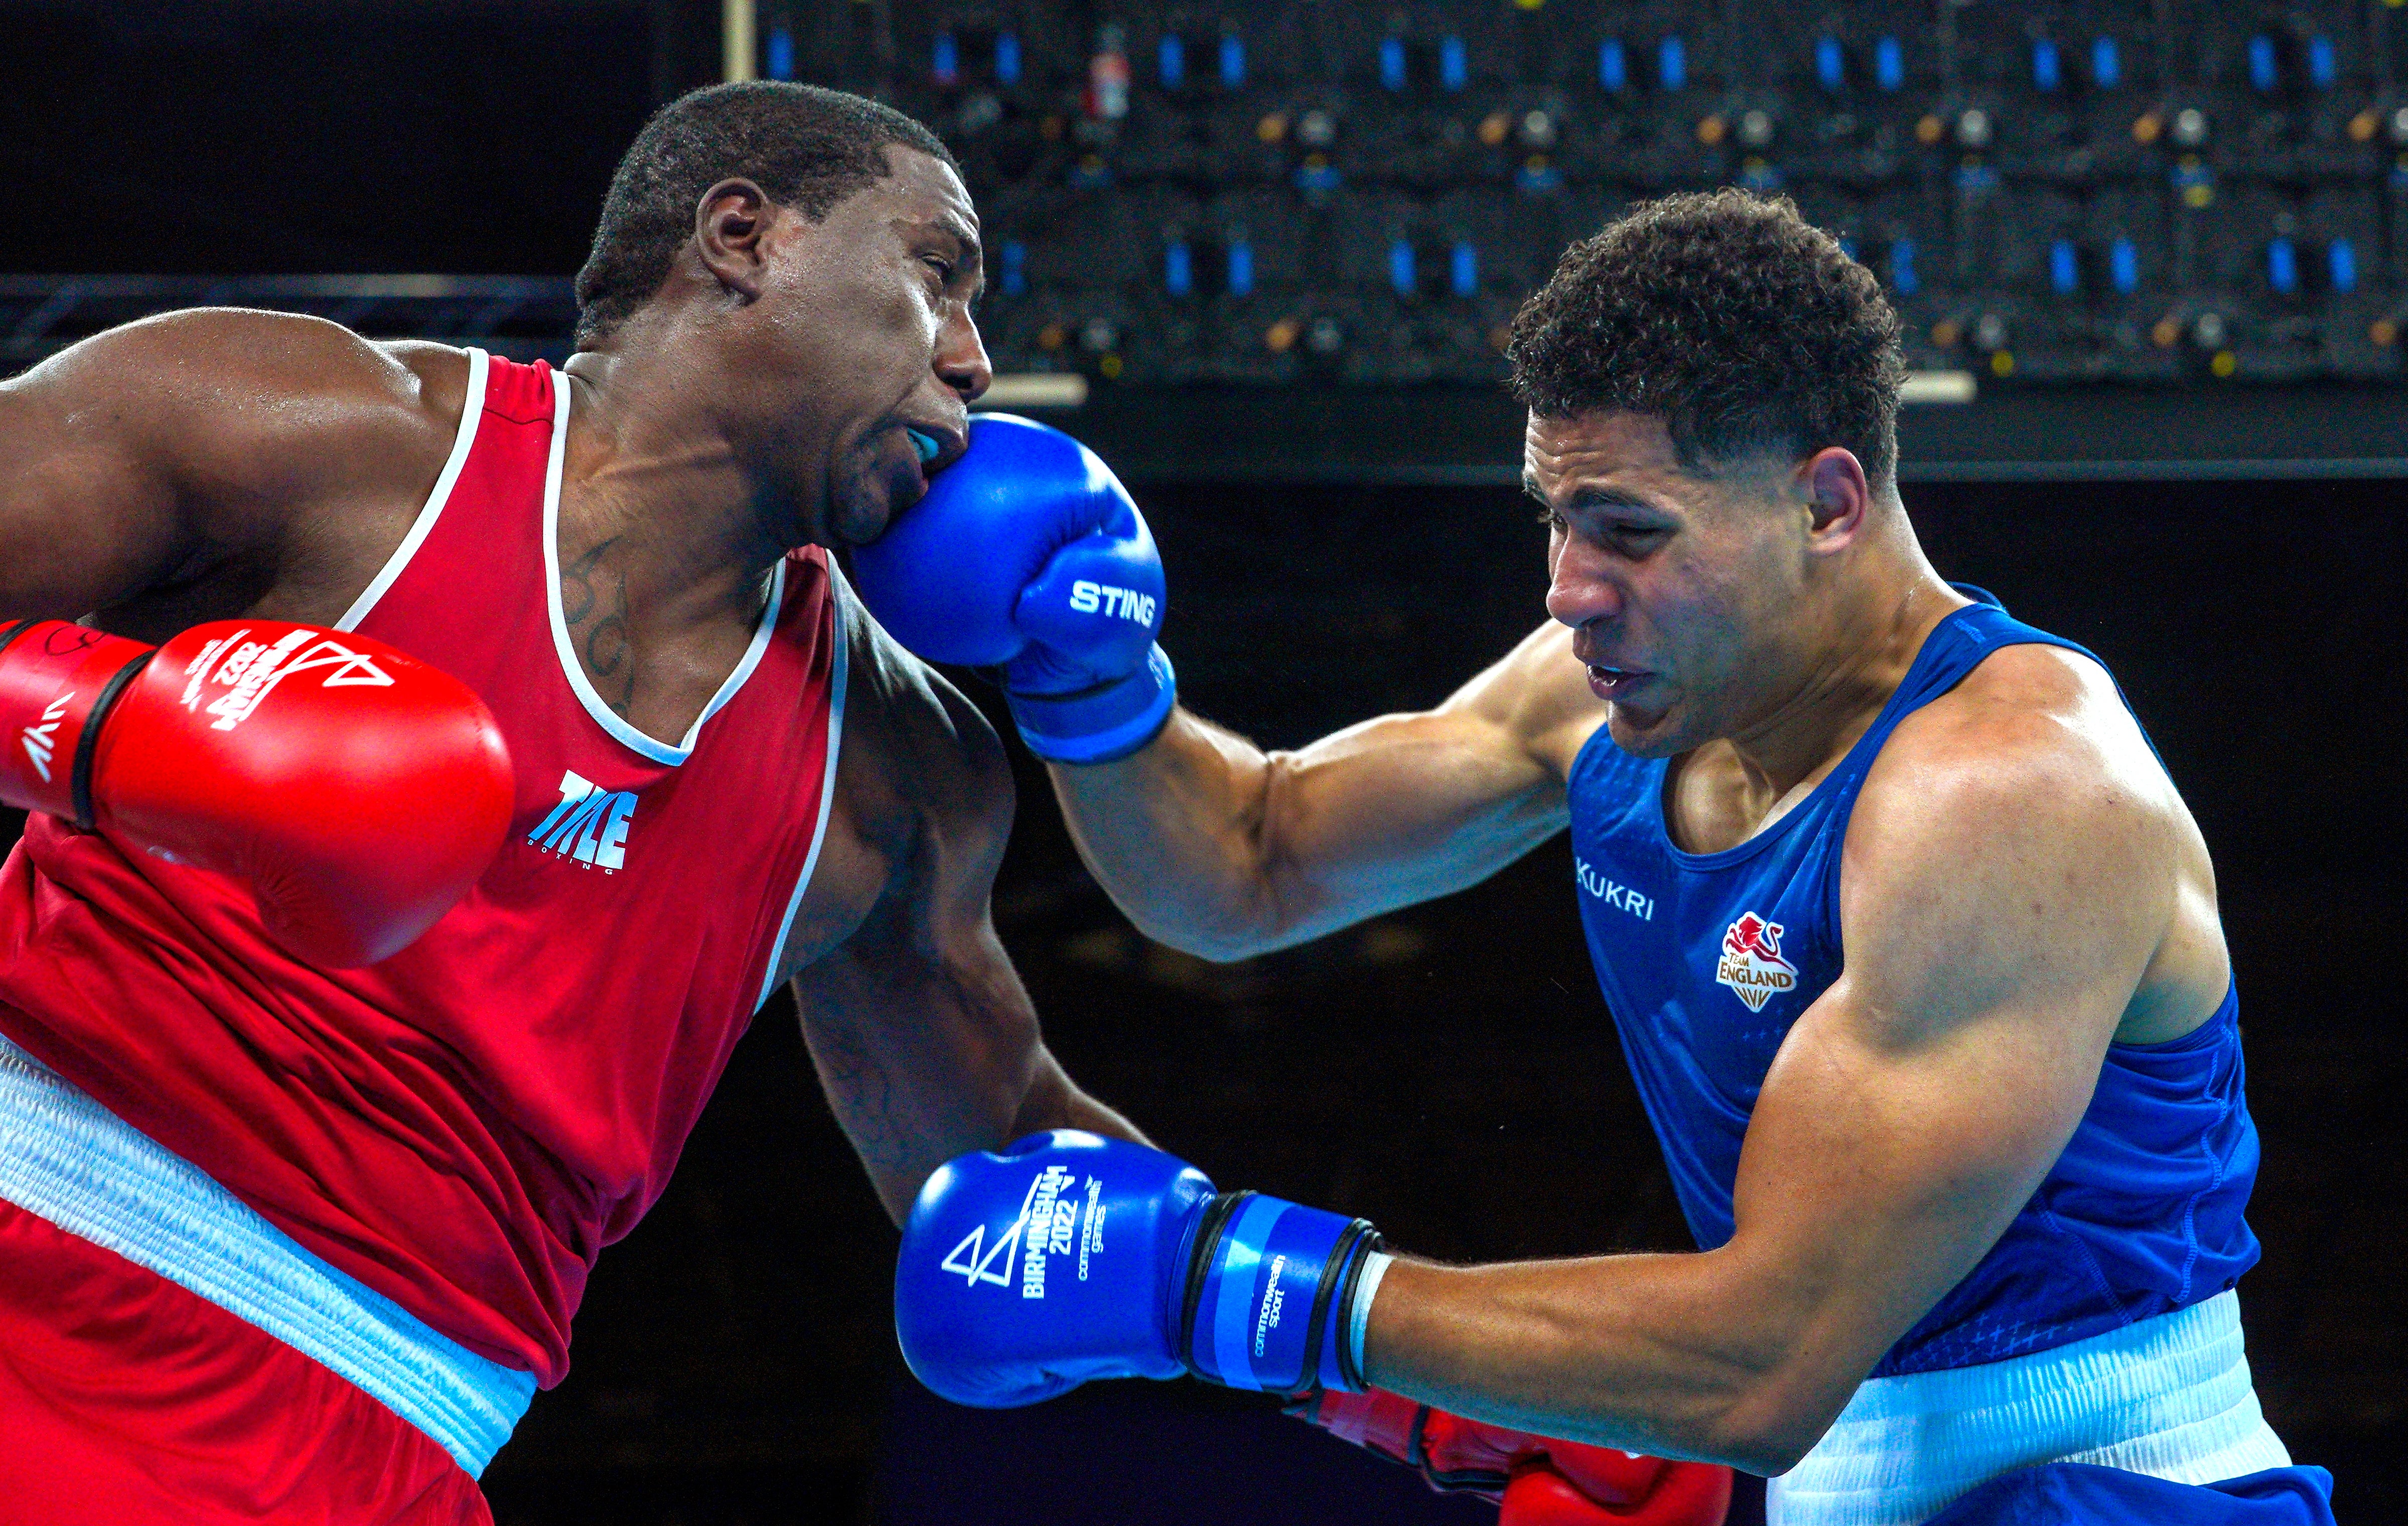 Commonwealth Games 2022 Delicious Orie inspired by Anthony Joshua as he targets gold The Independent